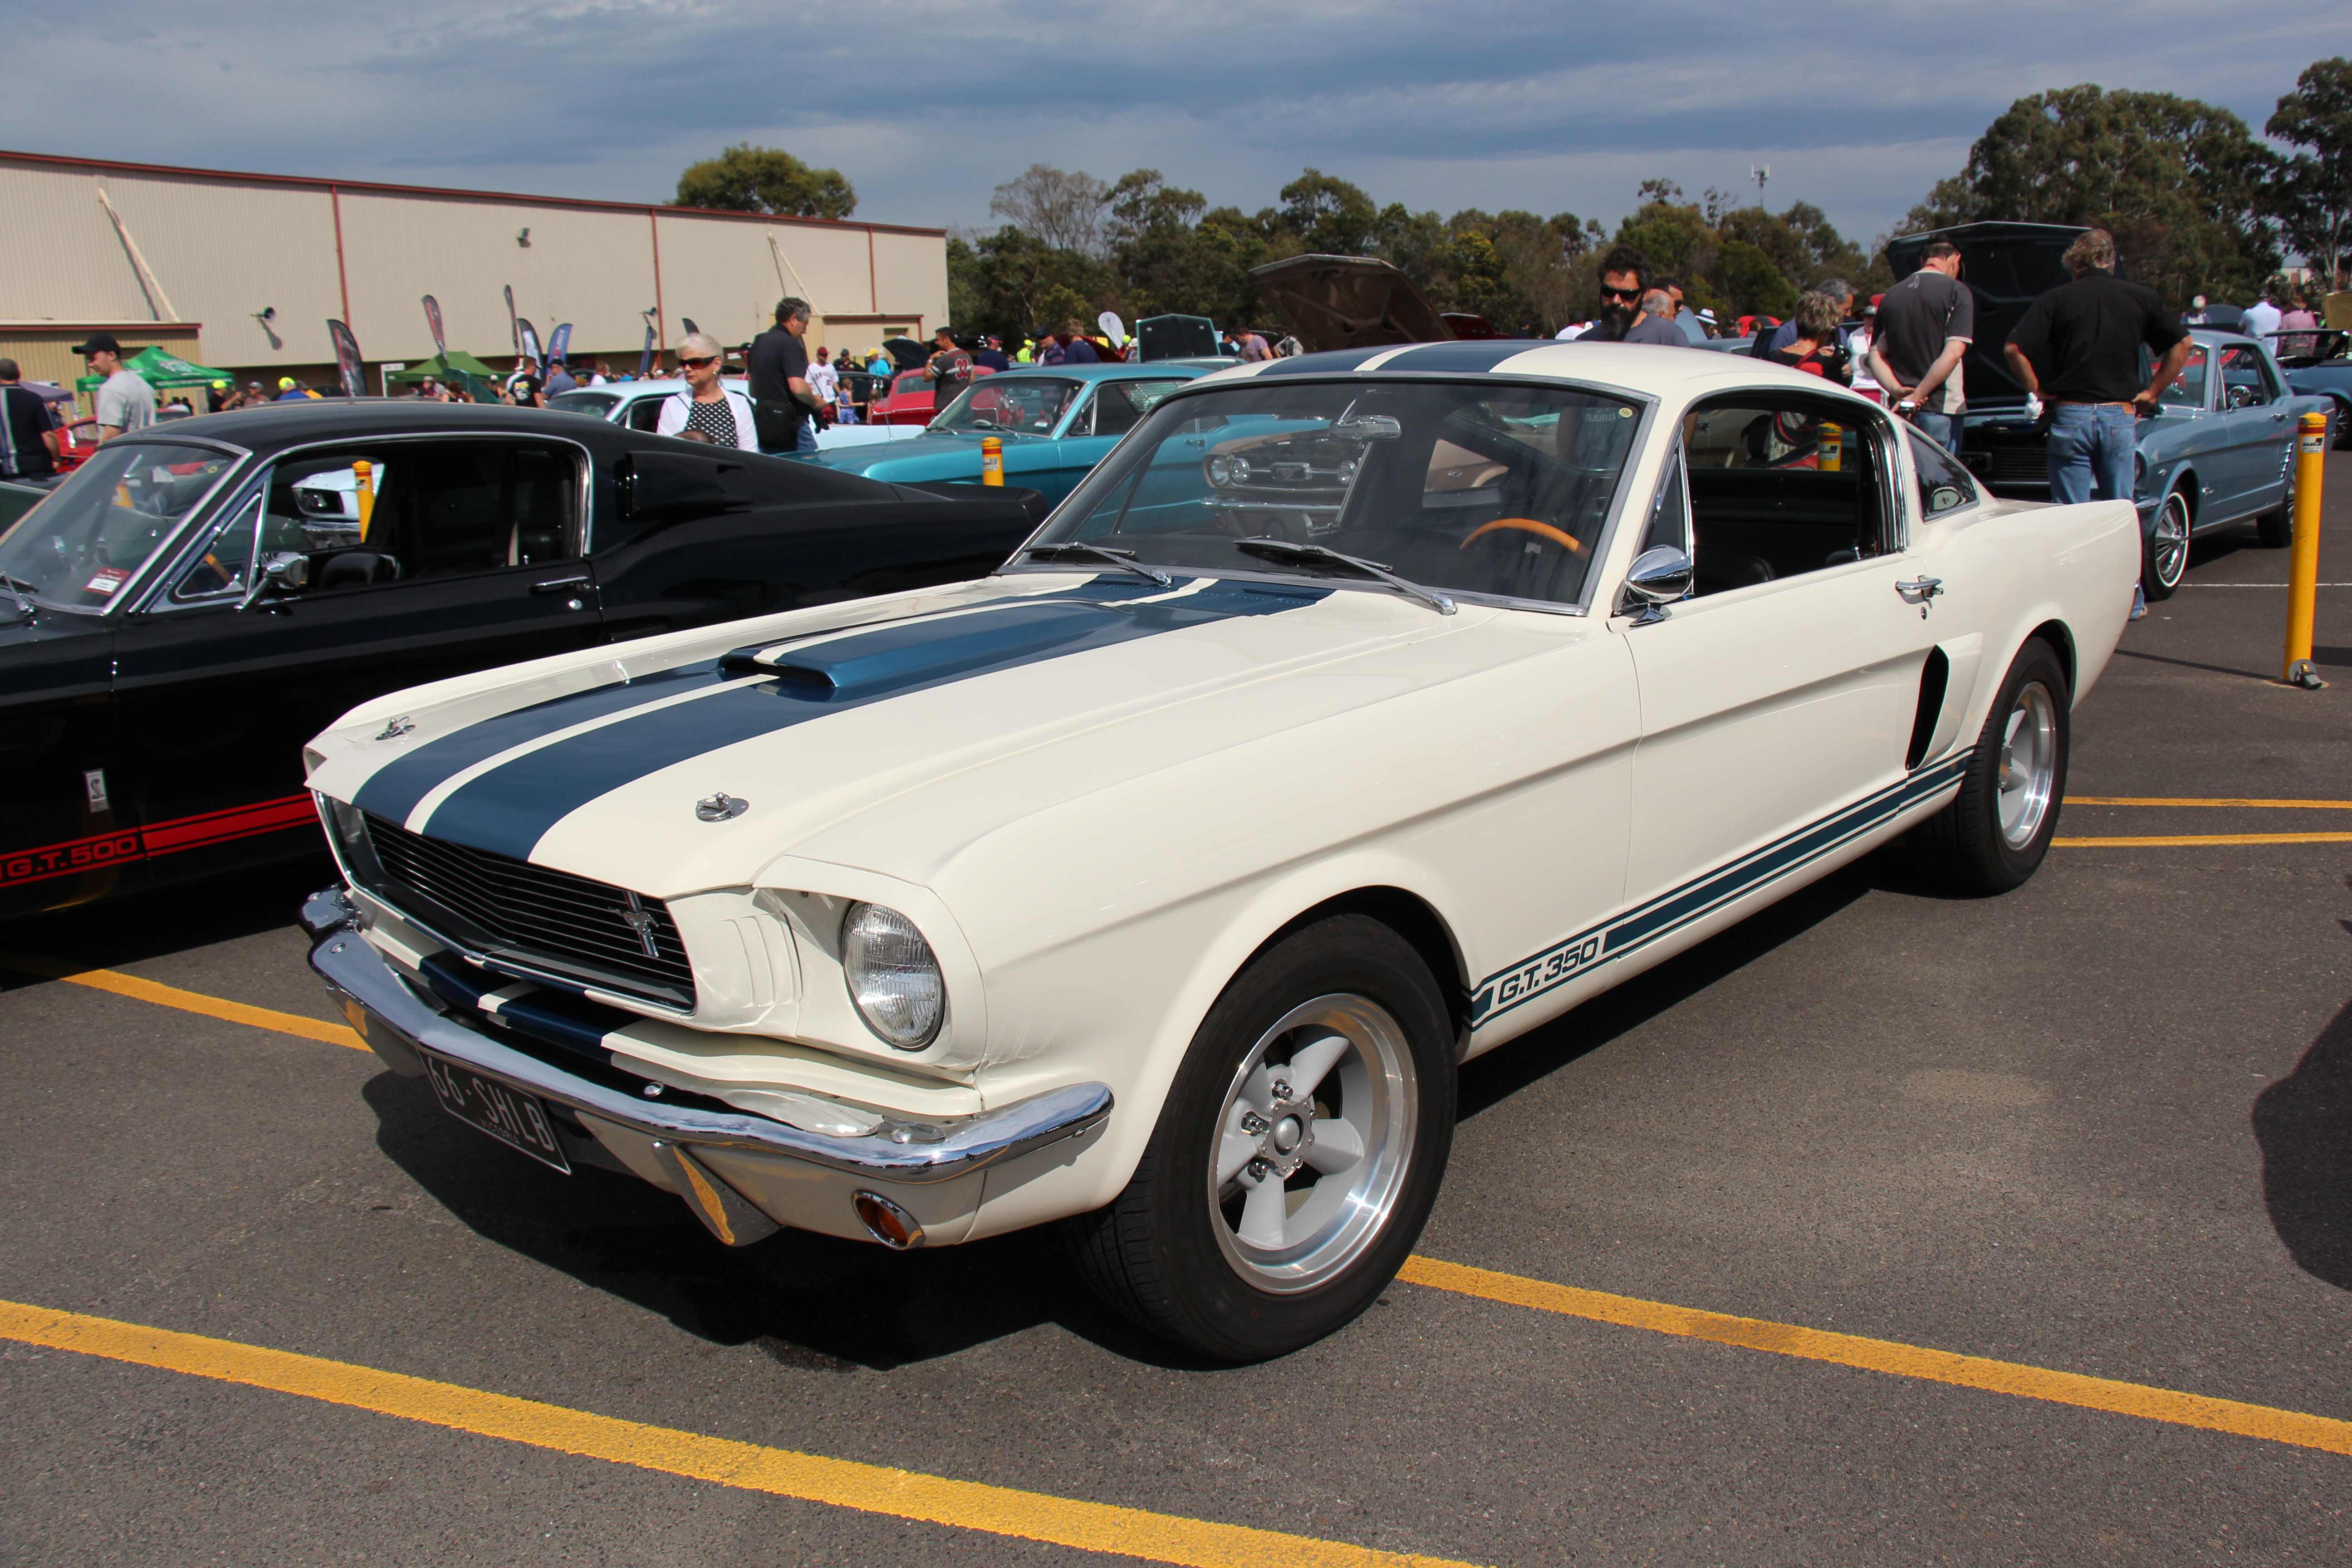 Fichier:1966 Shelby Mustang GT350 Fastback (14959769894).jpg — Wikipédia